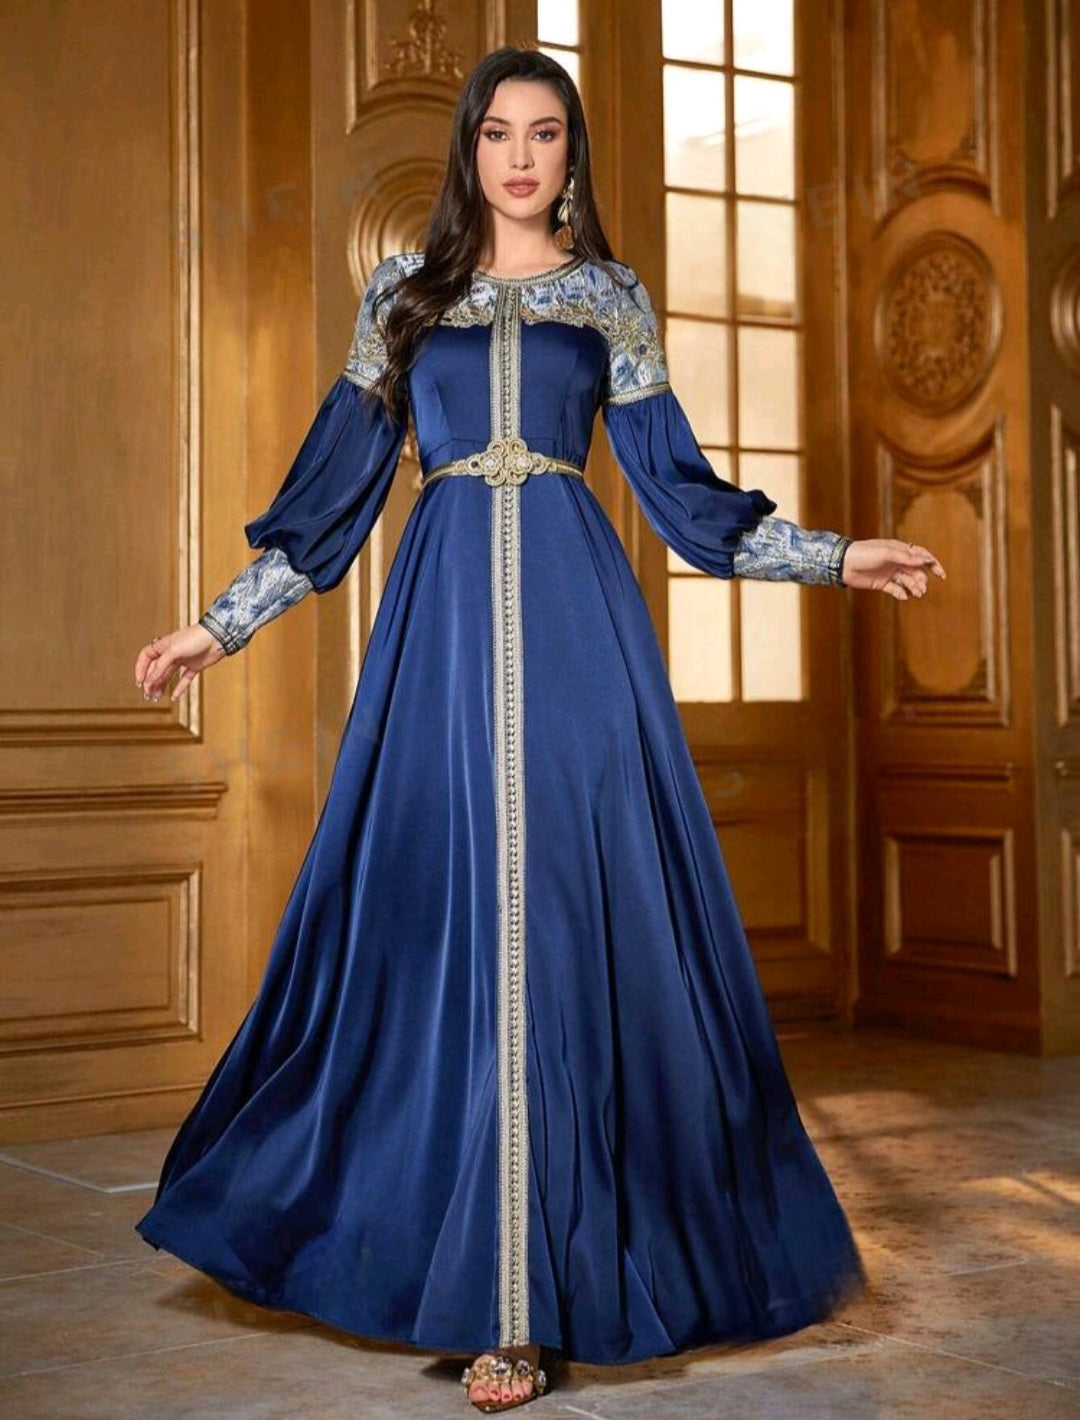 Blue Dress with brocade detail. Includes belt